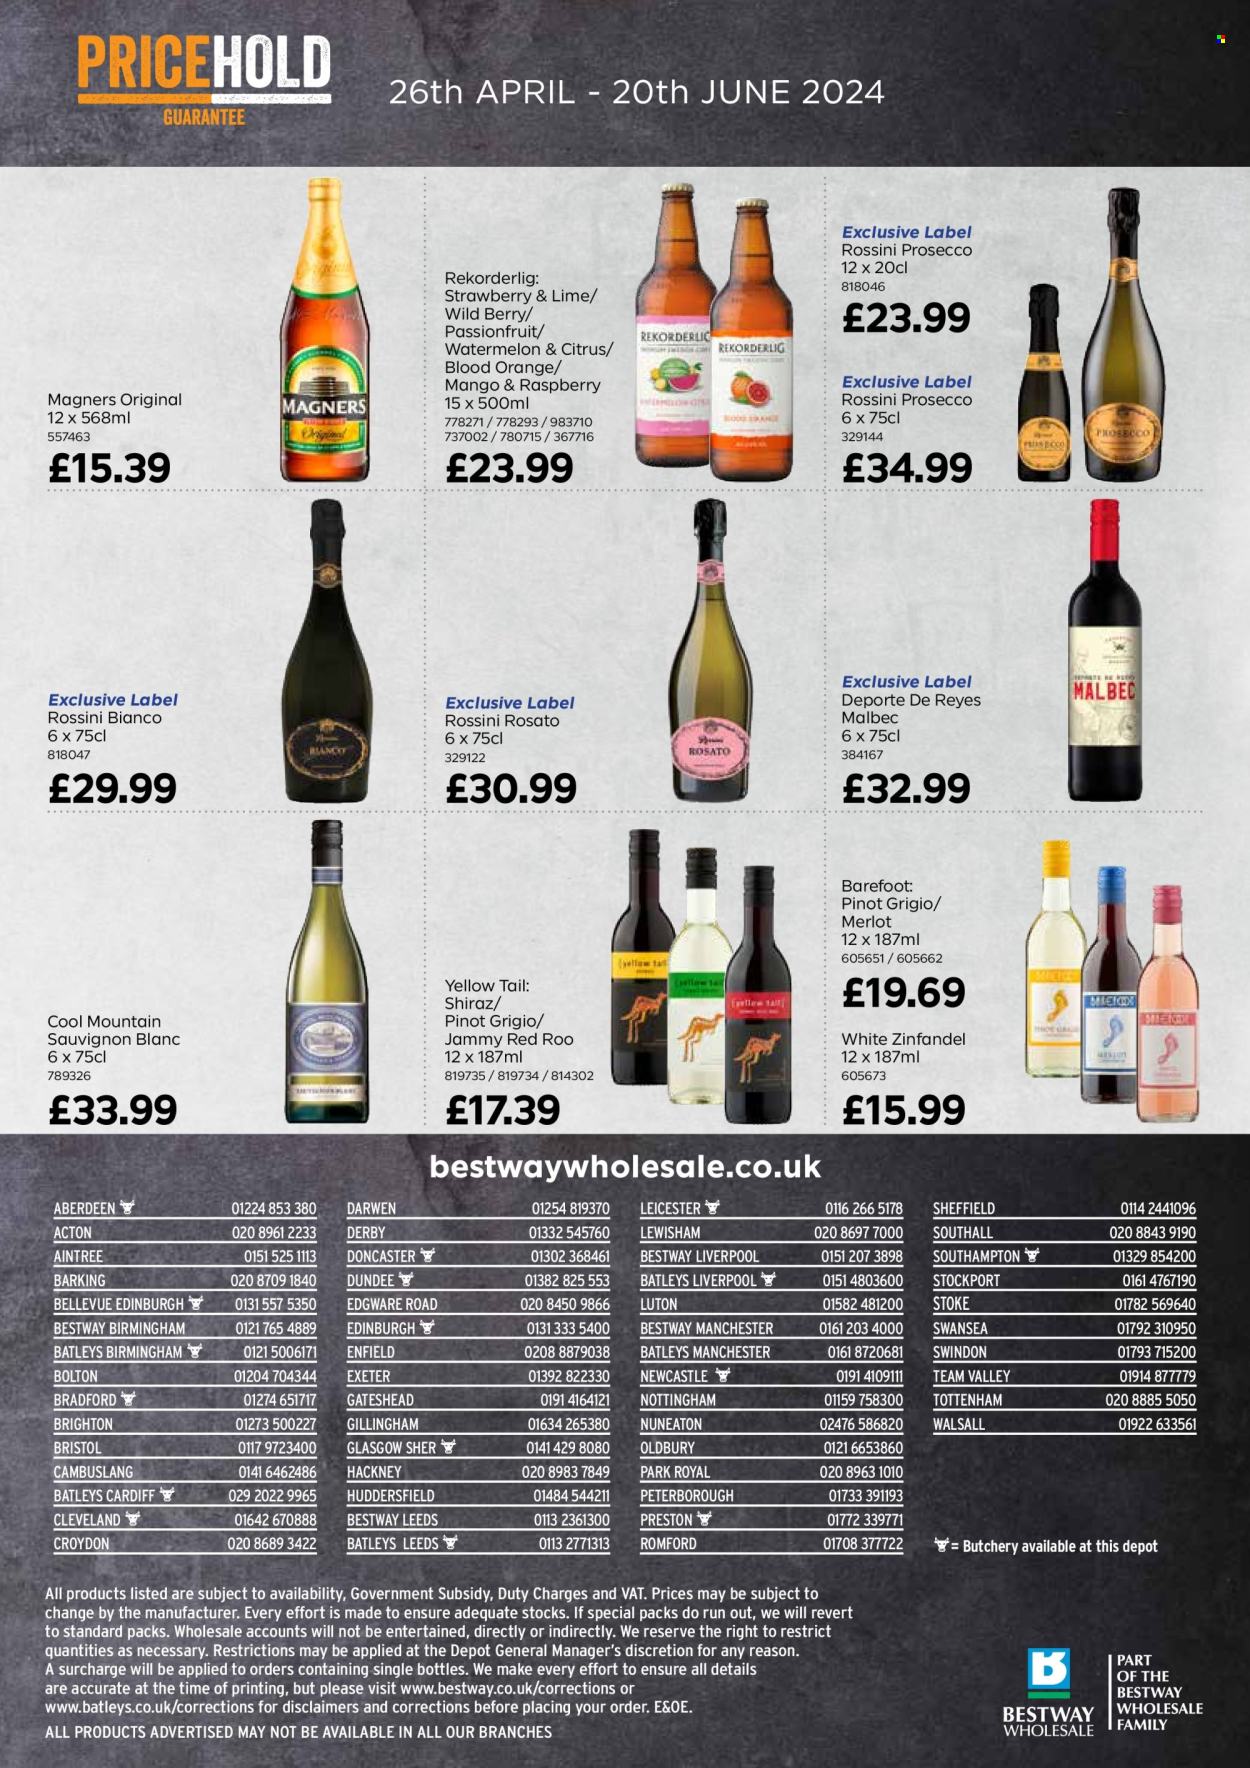 thumbnail - Bestway offer  - 26/04/2024 - 20/06/2024 - Sales products - beer, alcohol, Magners, watermelon, red wine, sparkling wine, white wine, prosecco, wine, Merlot, Sauvignon Blanc, Shiraz, Pinot Grigio, Malbec, label, nutritional supplement. Page 20.